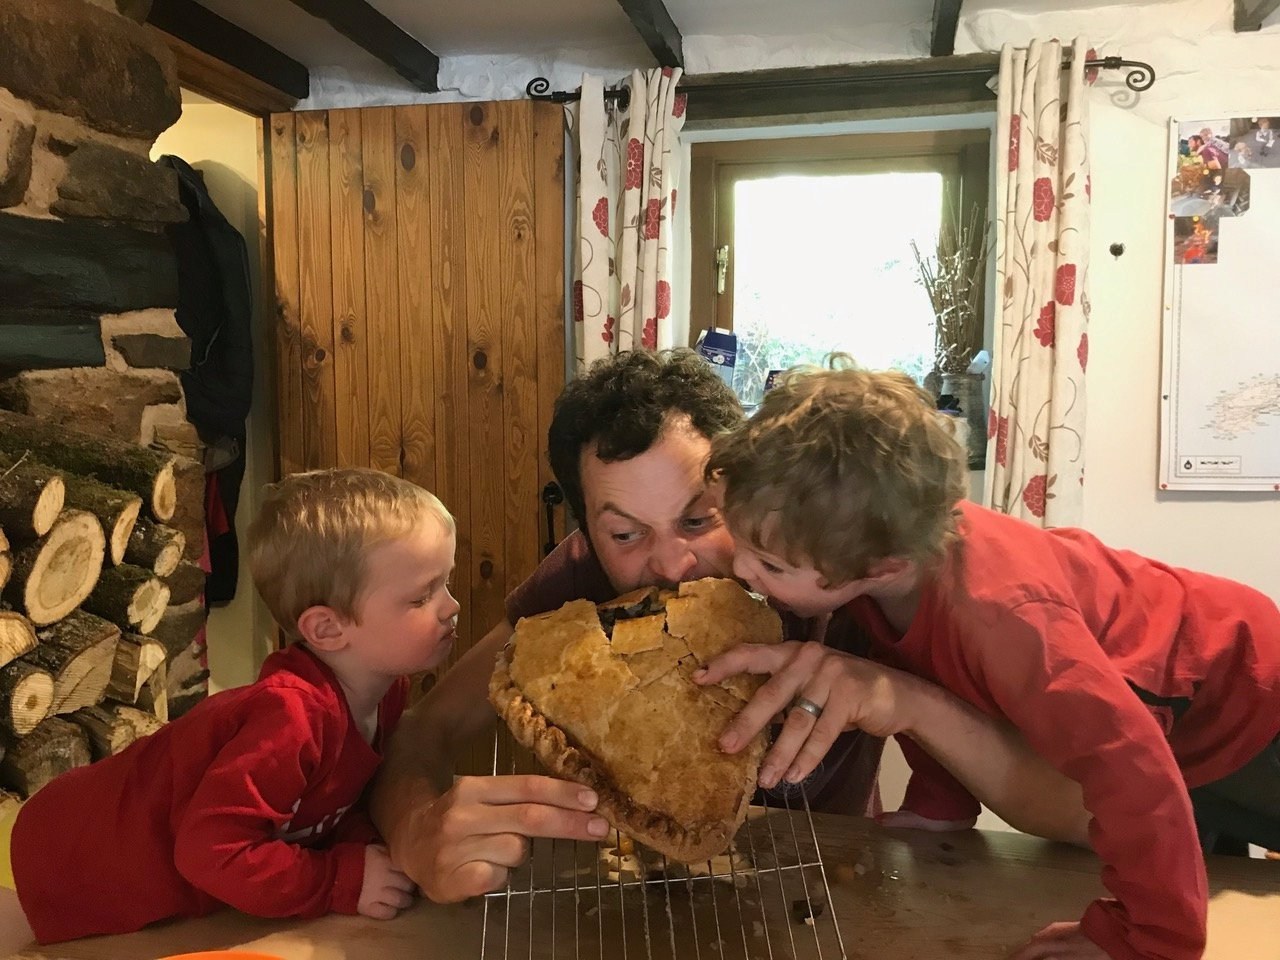 Dad bakes pasty the size of his son to celebrate his birth